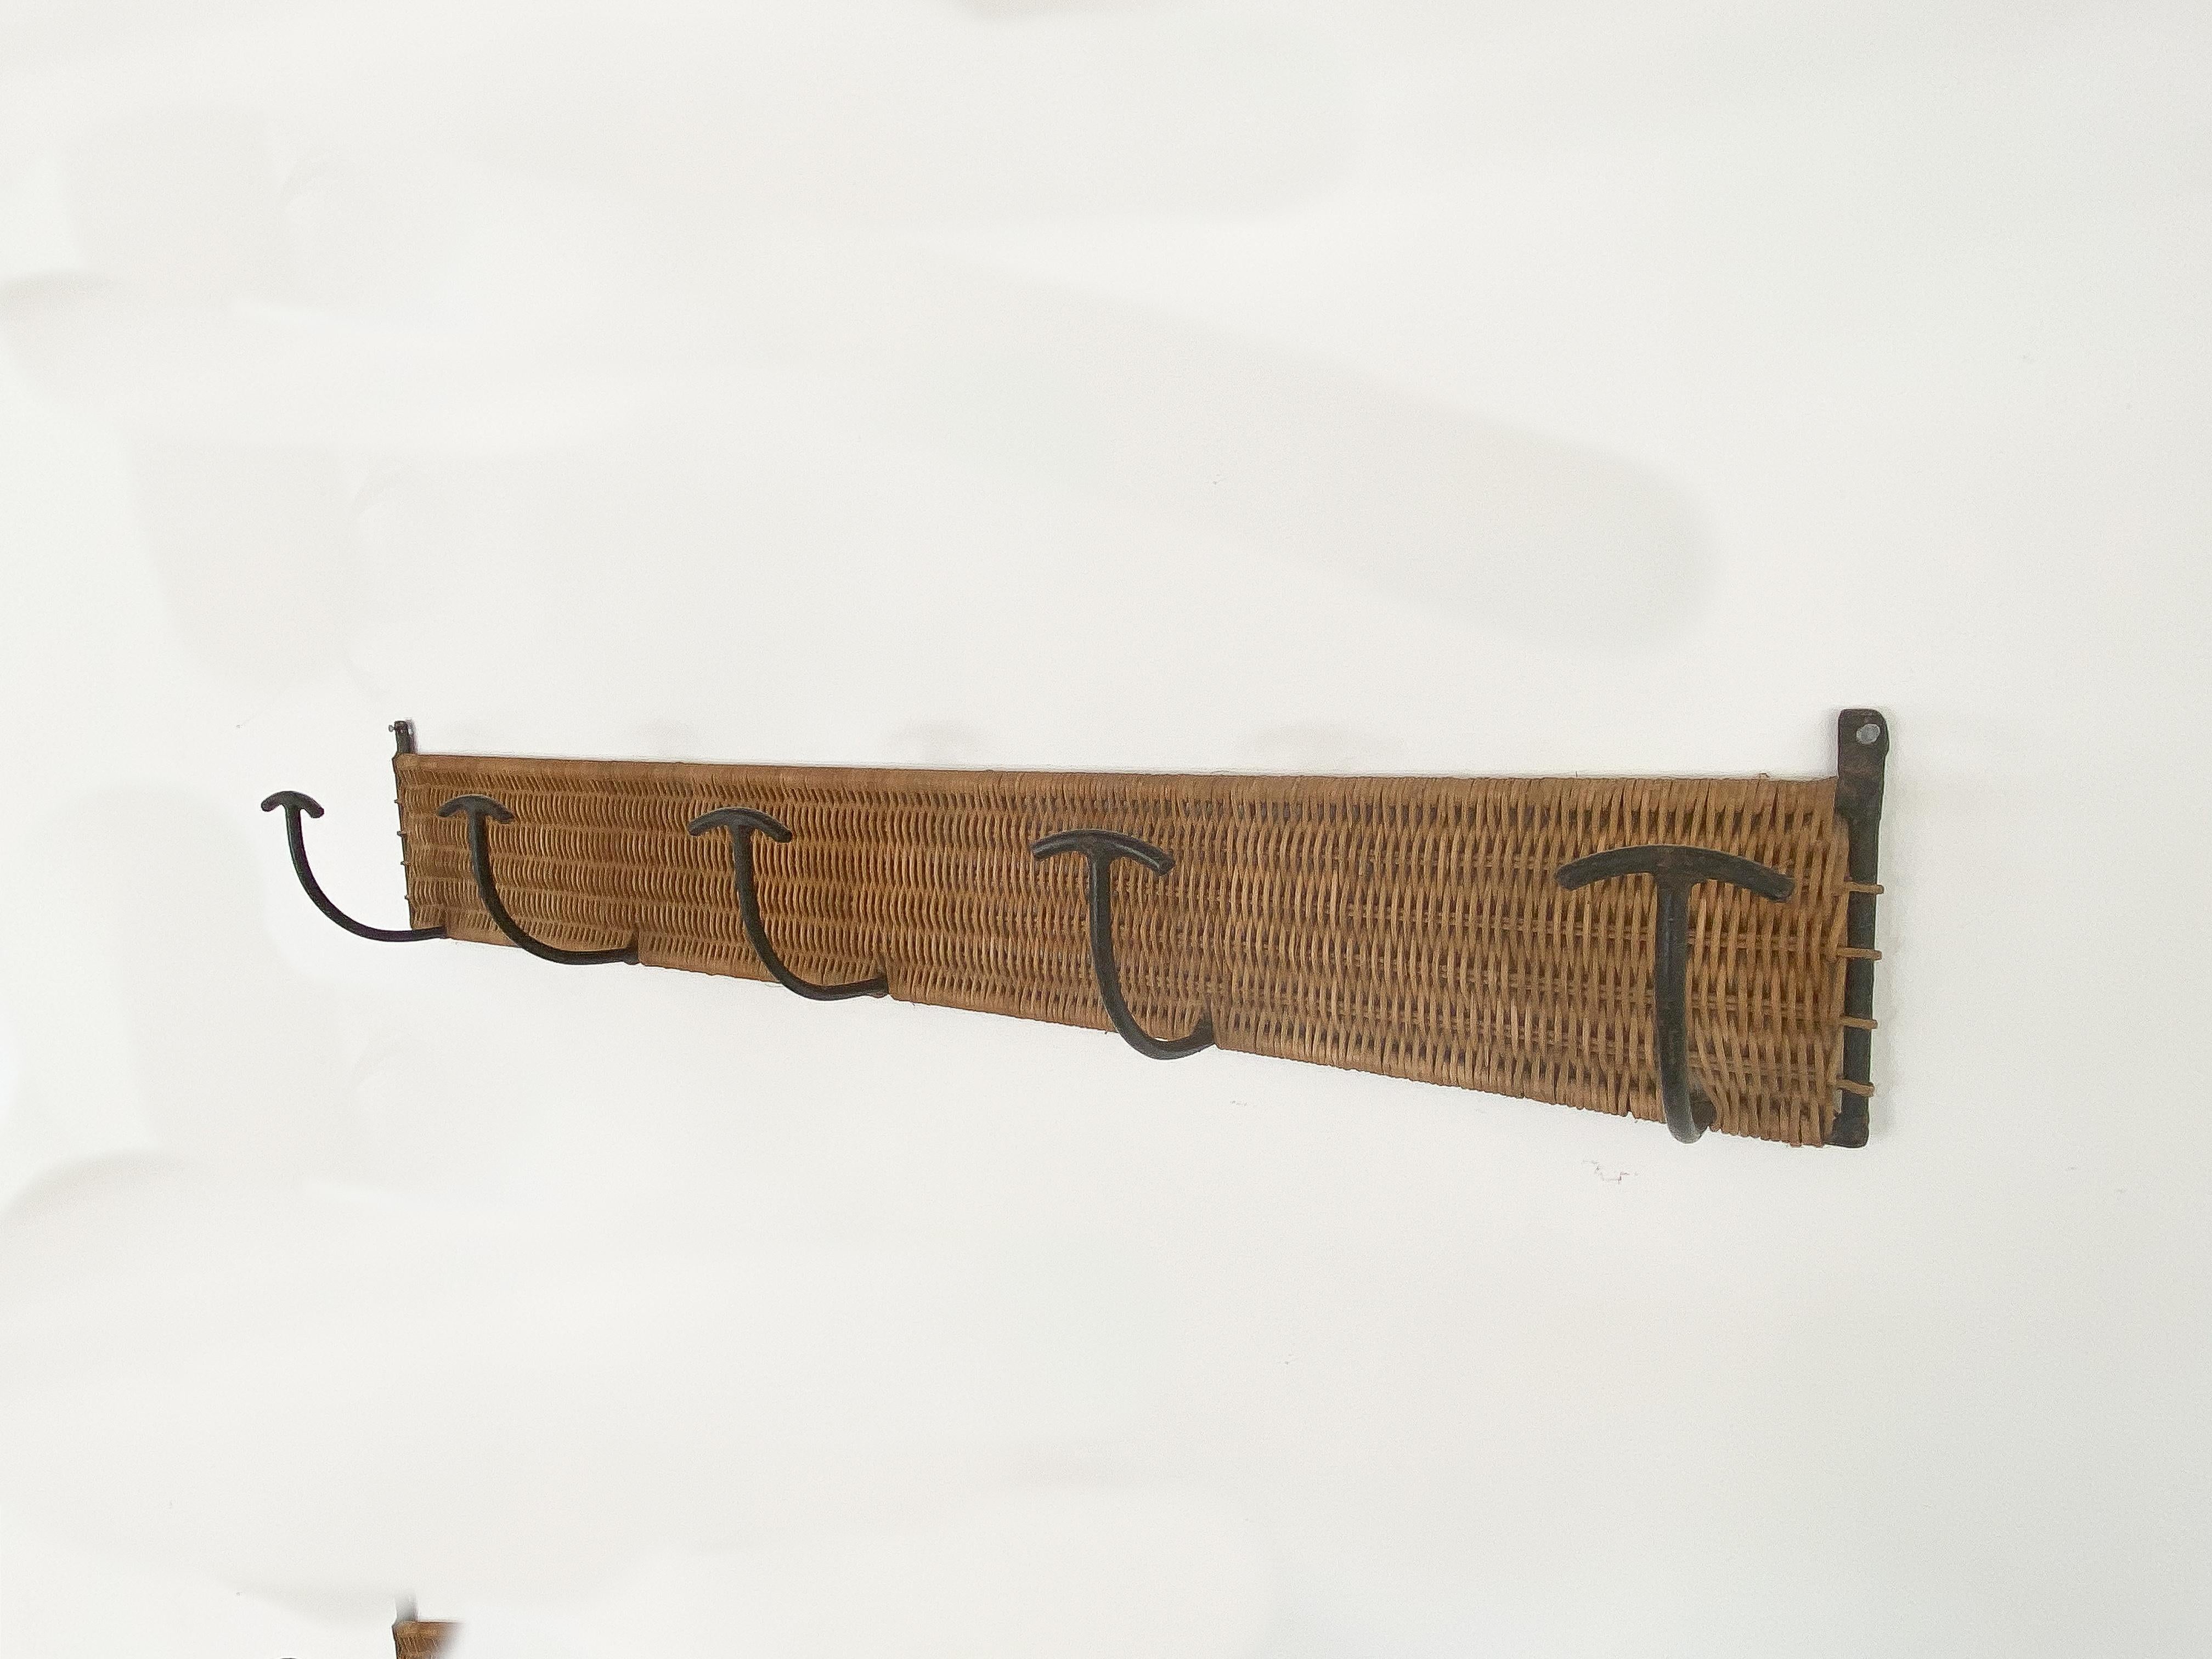 Vintage French woven wicker coat rack with 5 iron hooks to hand coats or hats. Black painted iron is original with chips in paint and signs of wear. Beautiful and functional piece.